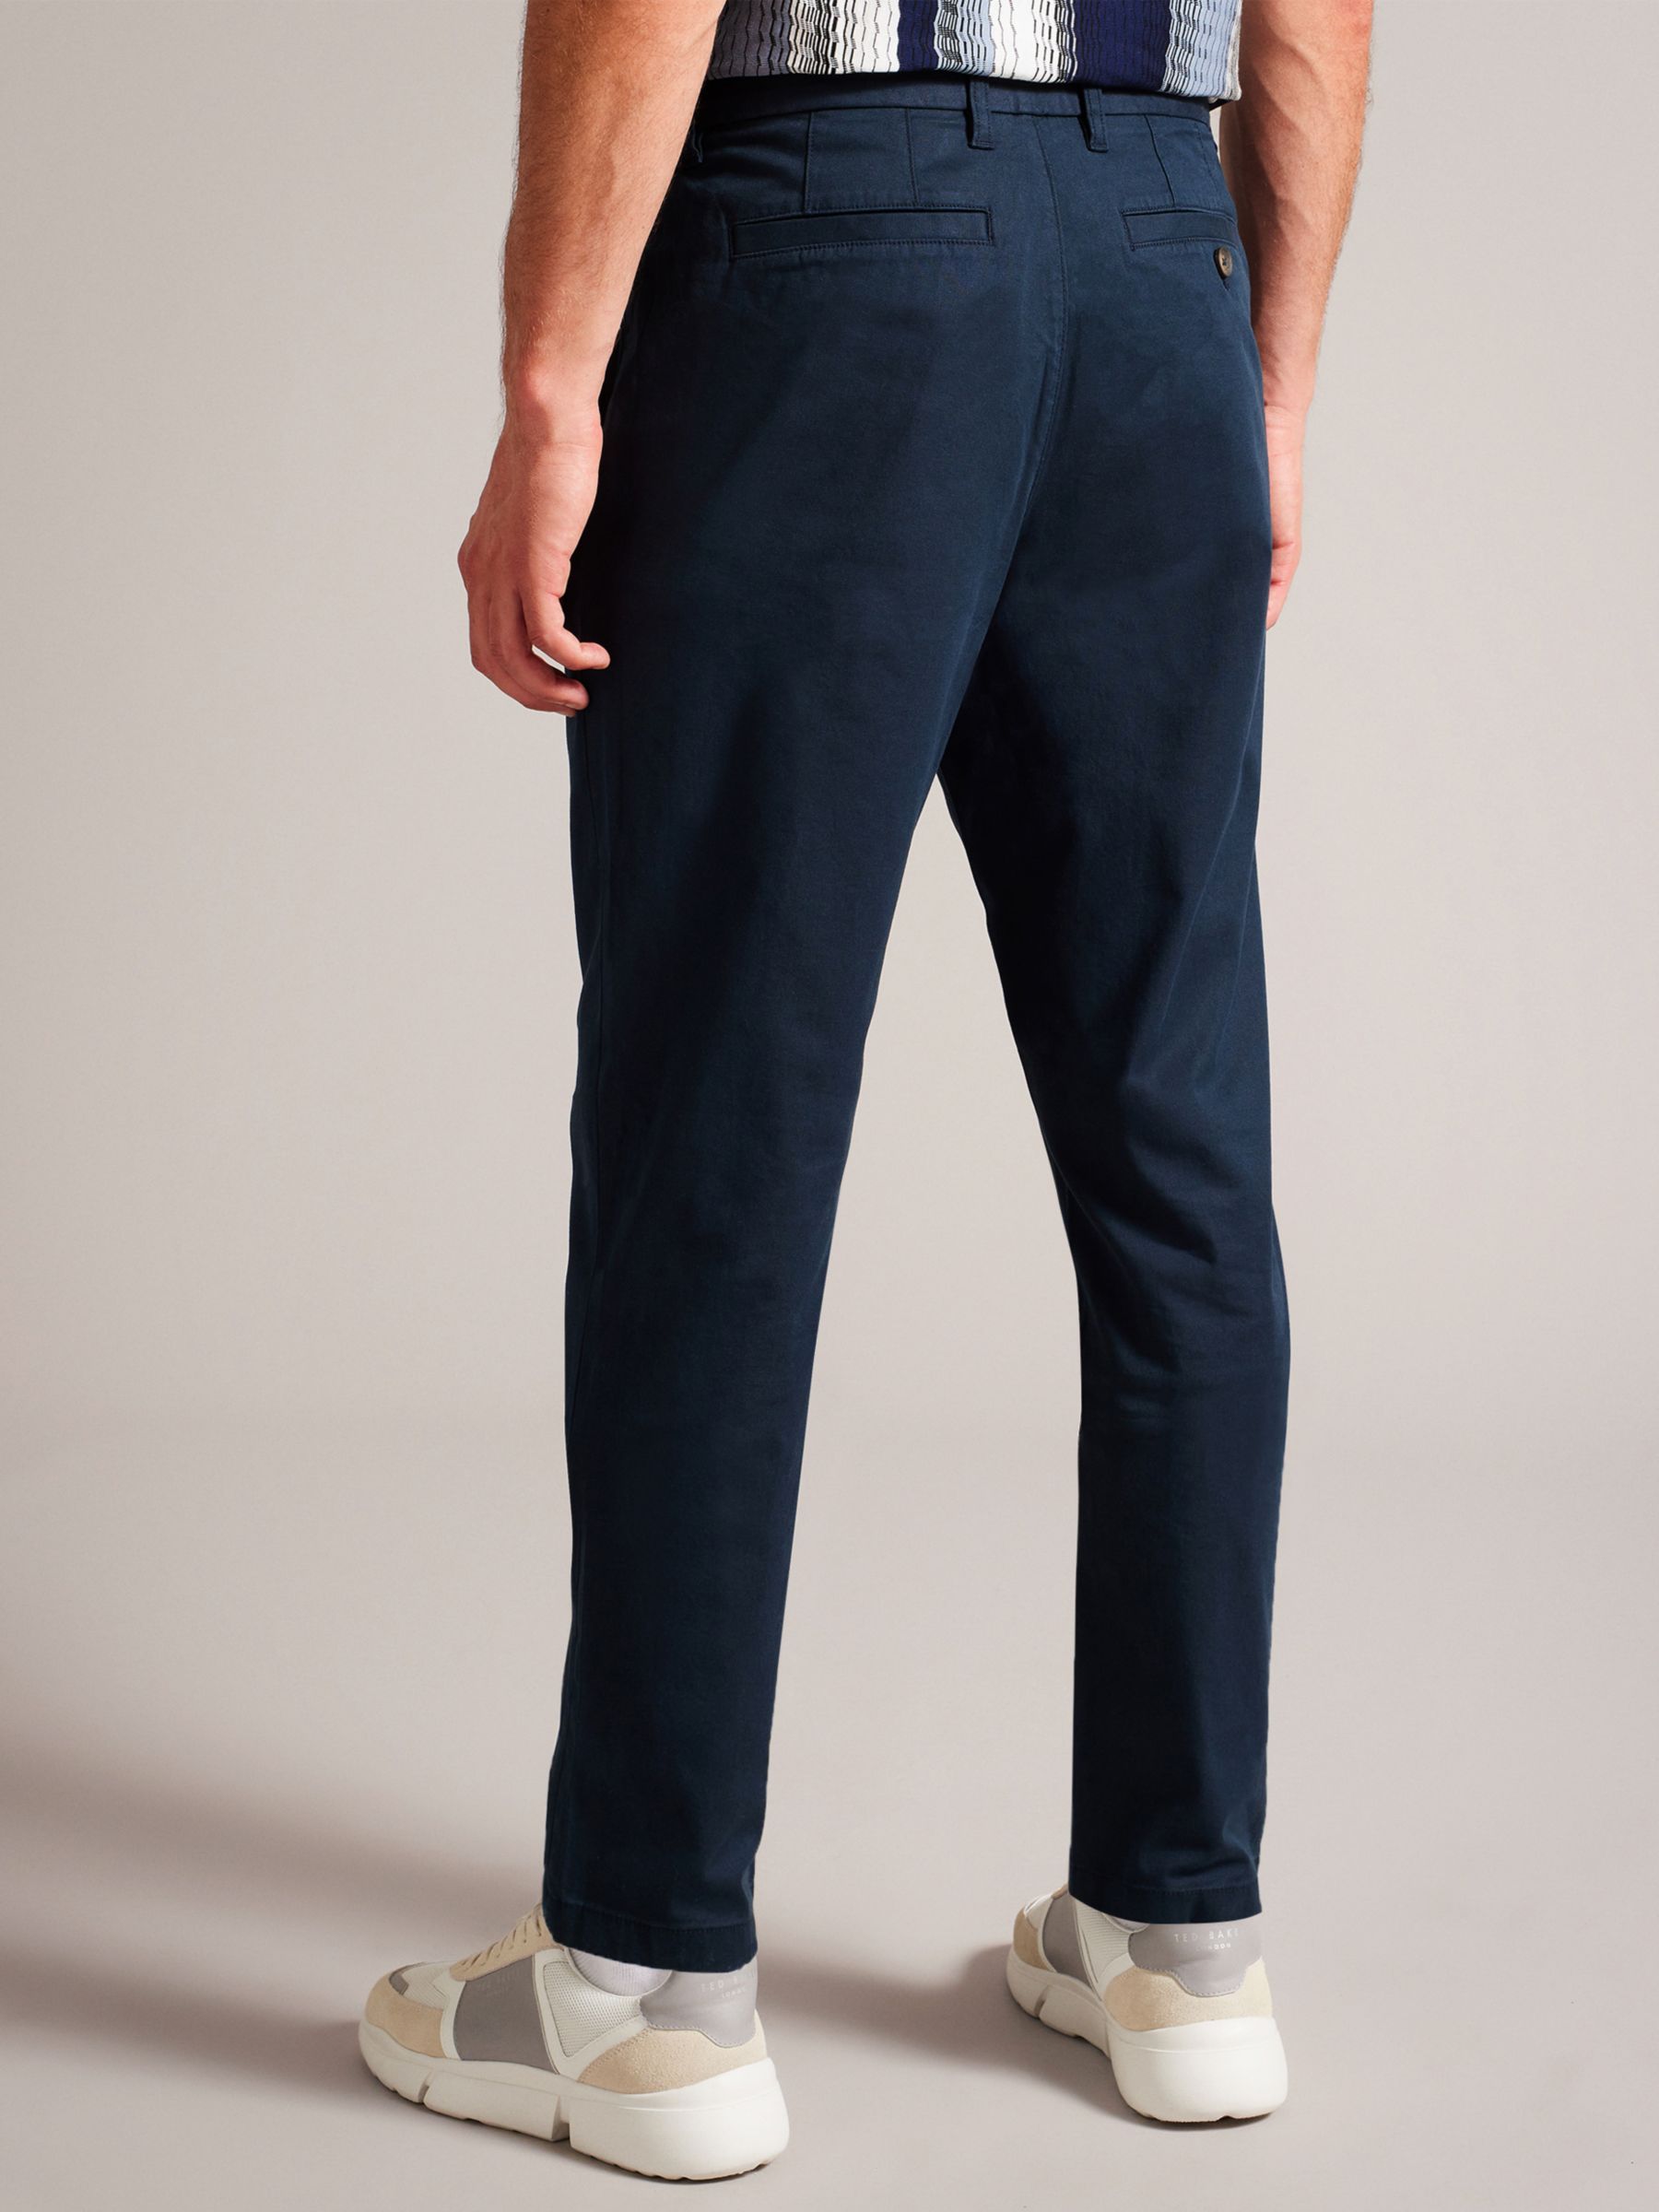 Ted Baker Haybrn Blue Navy Chino Trouser, Navy at John Lewis & Partners